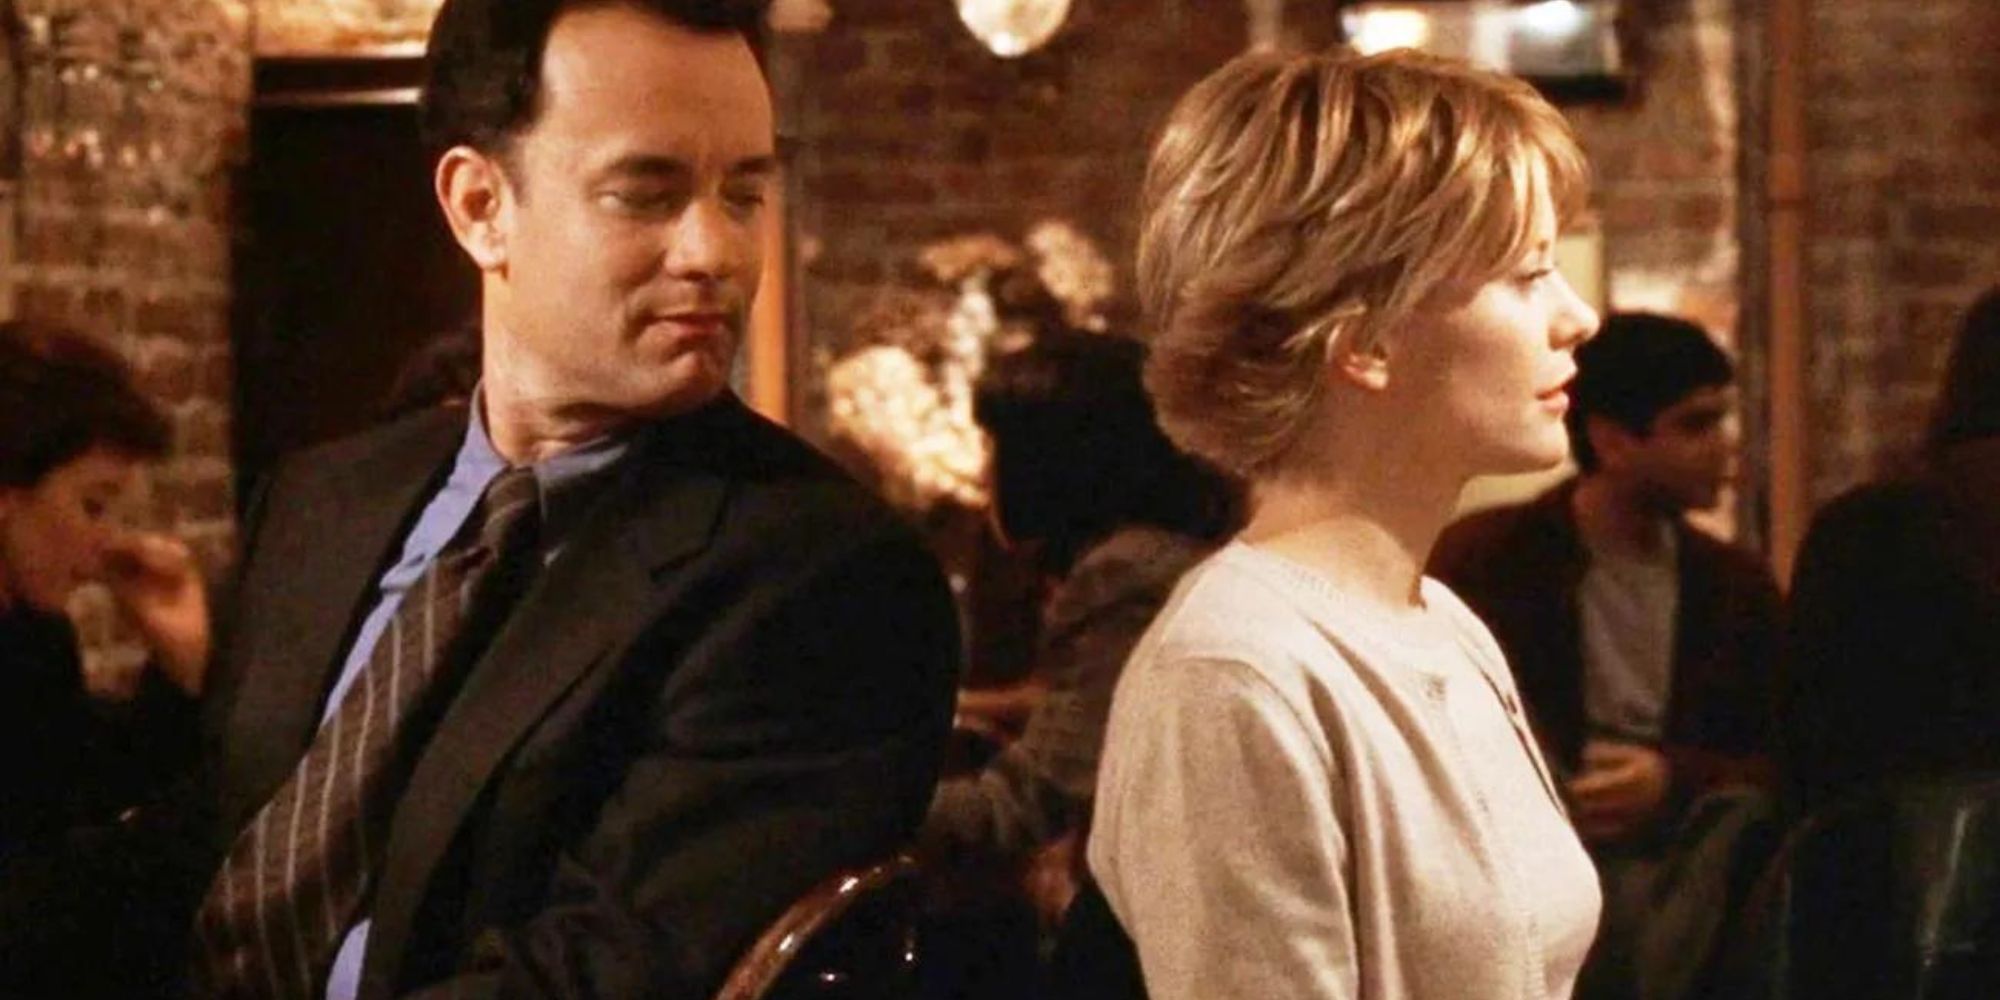 Kathleen and Joe from You've Got Mail sitting on chairs with their backs turned while Joe stares at her